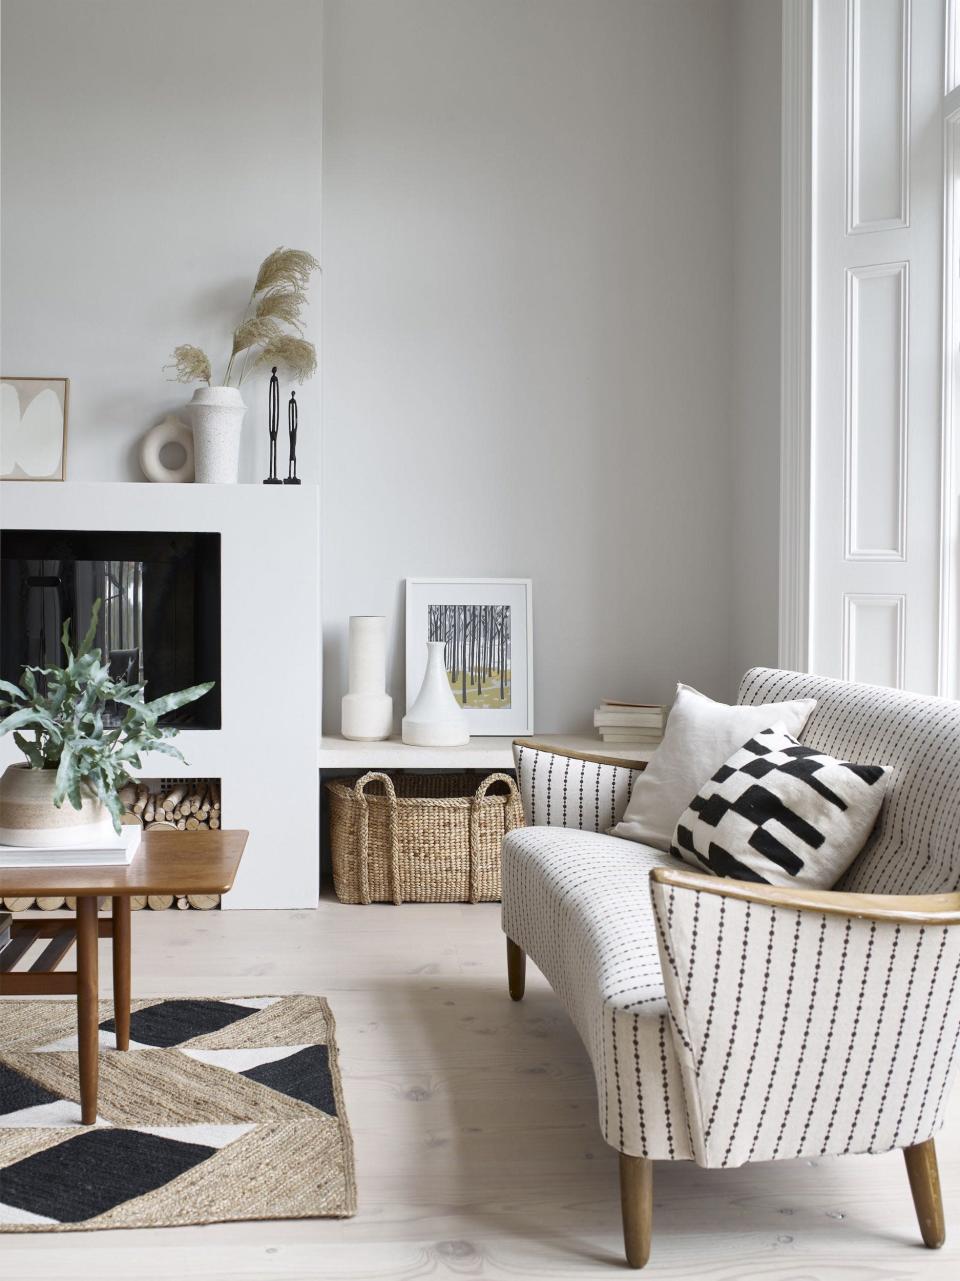 <p>Versatile and timeless, the best <a href="https://www.housebeautiful.com/uk/decorate/looks/a36342821/white-paint/" rel="nofollow noopener" target="_blank" data-ylk="slk:white paint" class="link ">white paint</a> colours stand easily on their own as a design element. We all love dabbling in dark shades (you only need to scroll through Instagram to see) but a crisp white scheme can work wonders when it comes to designing a soothing space. And breathe...</p><p>'Because white brings in light, it can cause an uplift in mood and bring an element of serenity if we are overstimulated,' says Lee Chambers, colour psychologist and founder of <a href="https://www.essentialise.co.uk/" rel="nofollow noopener" target="_blank" data-ylk="slk:Essentialise" class="link ">Essentialise</a>. 'It also can really open a space both physically and in our minds.'</p><p>Pictured: 'Romney Wool' by <a href="https://www.homebase.co.uk/dulux-heritage-matt-emulsion-paint-romney-wool-2.5l/12881996.html" rel="nofollow noopener" target="_blank" data-ylk="slk:Dulux Heritage" class="link ">Dulux Heritage</a></p>